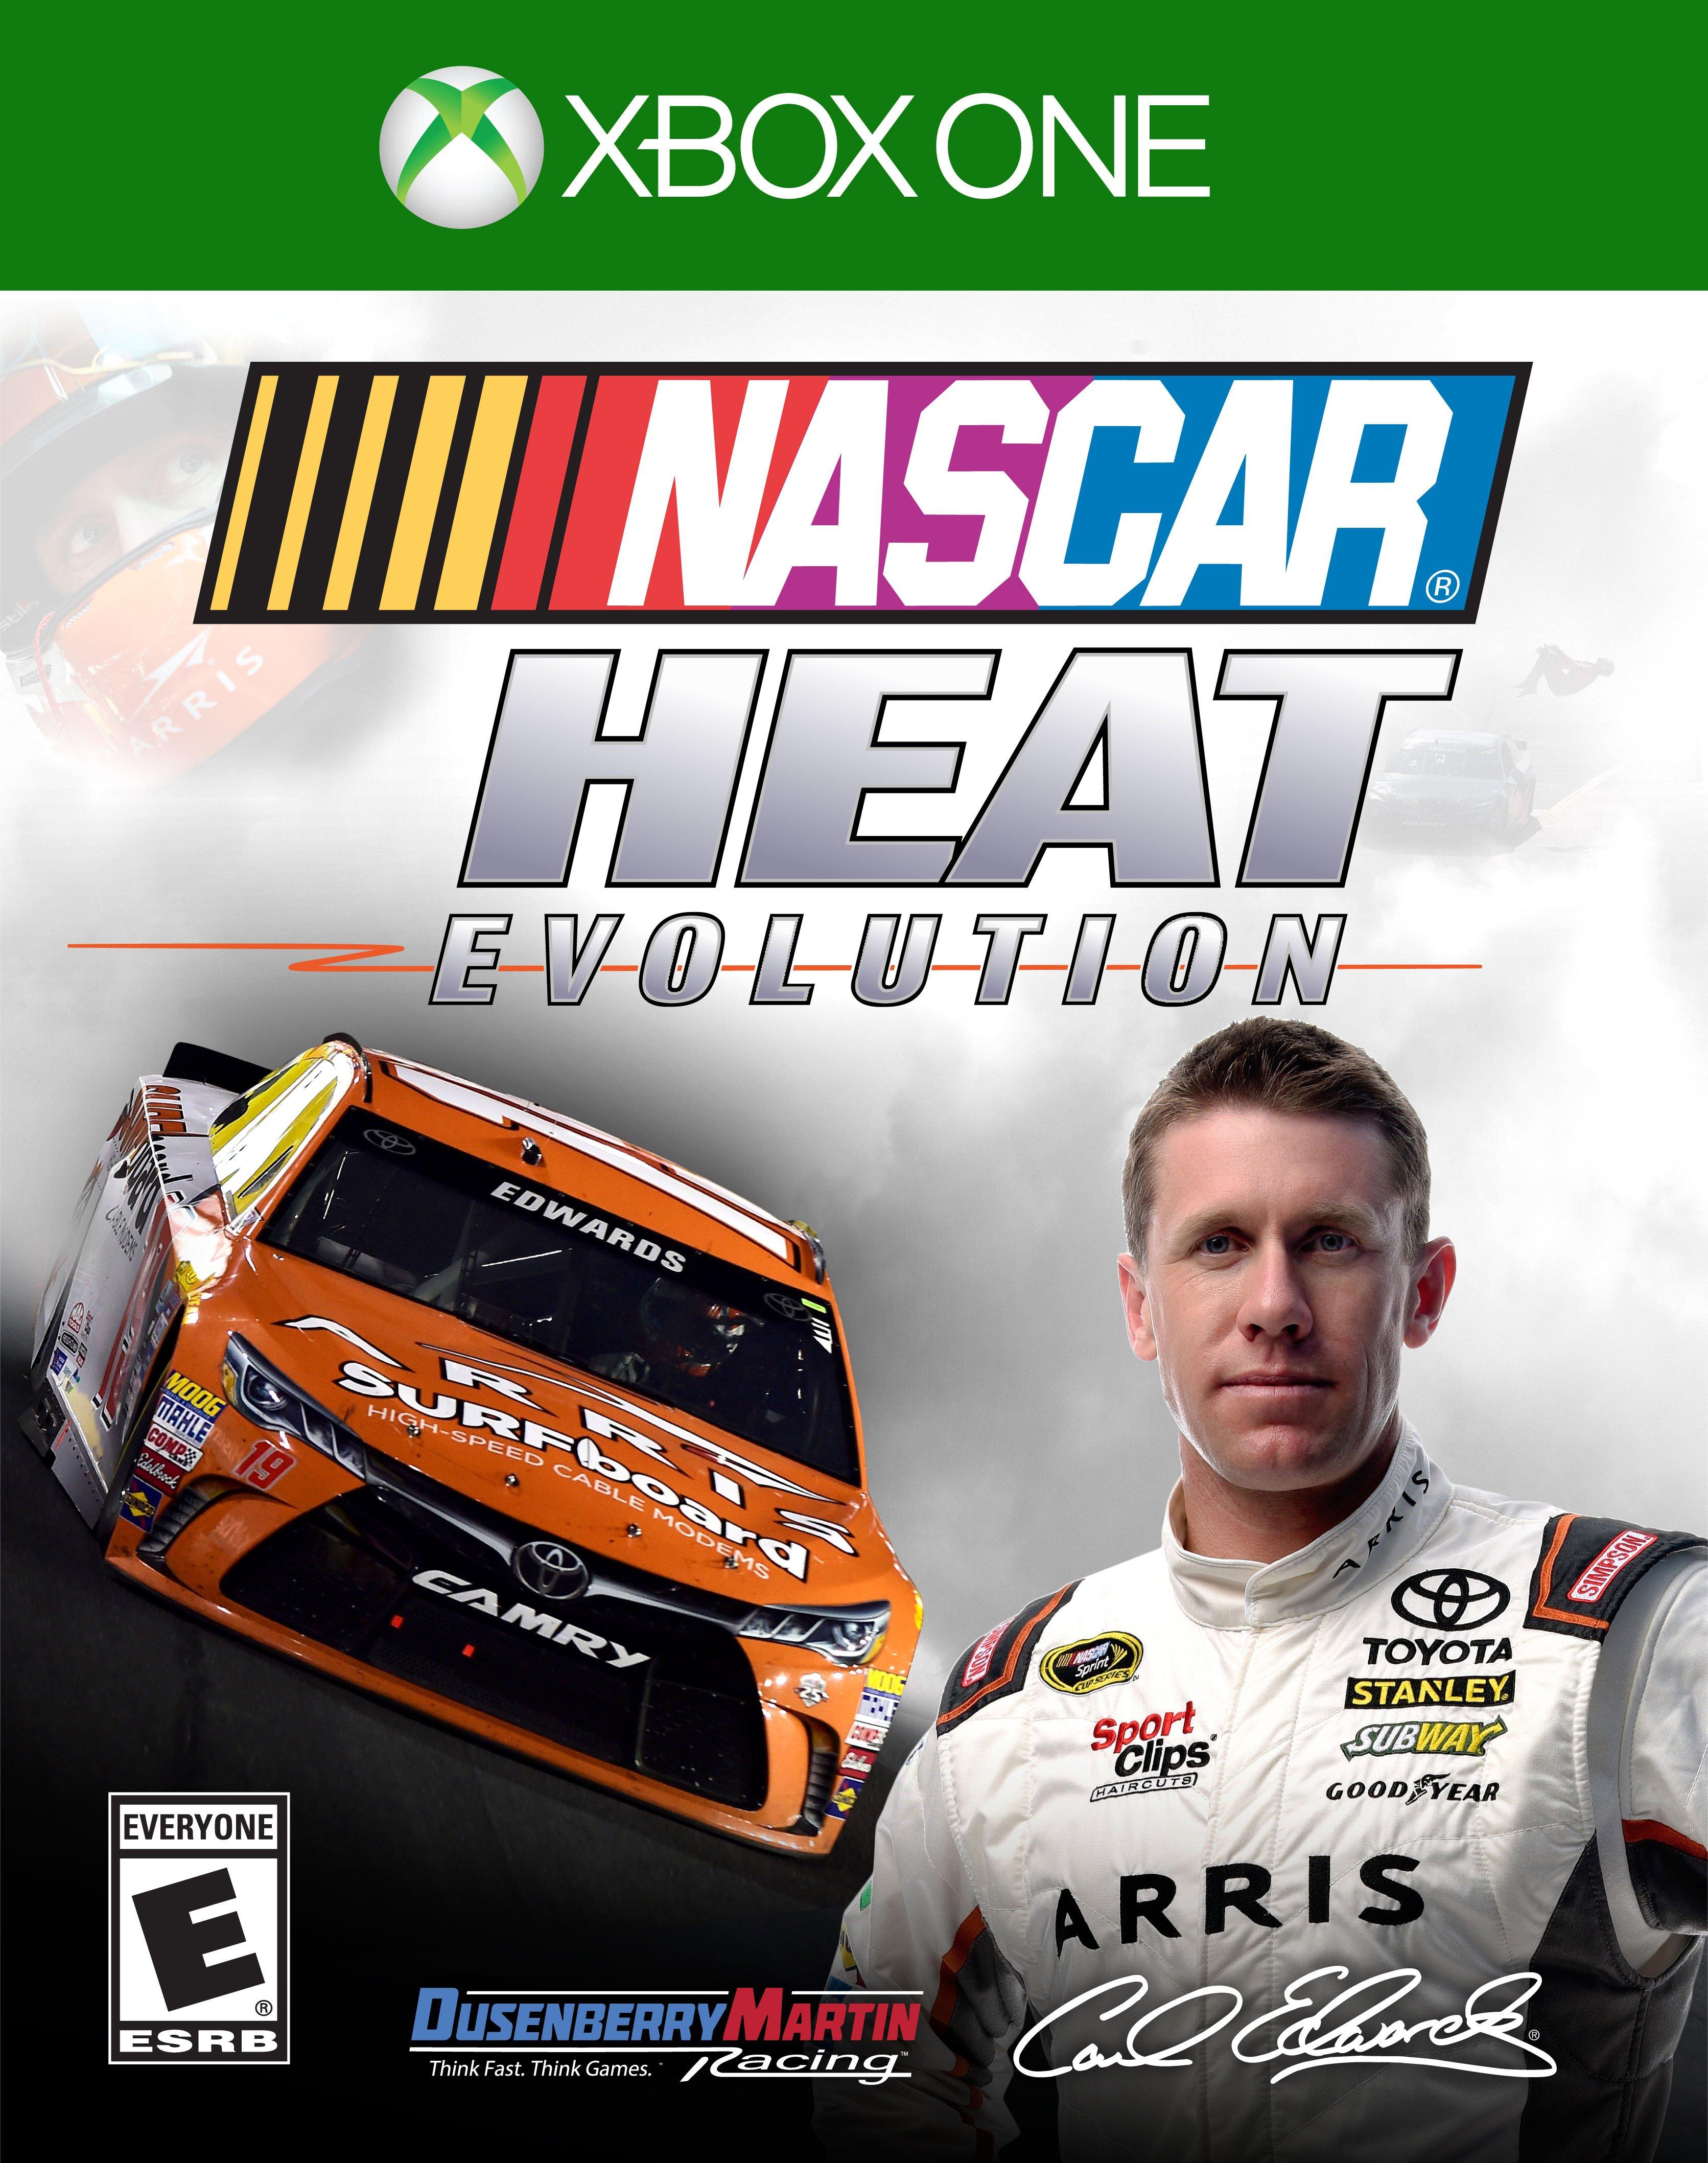 newest nascar game for xbox one